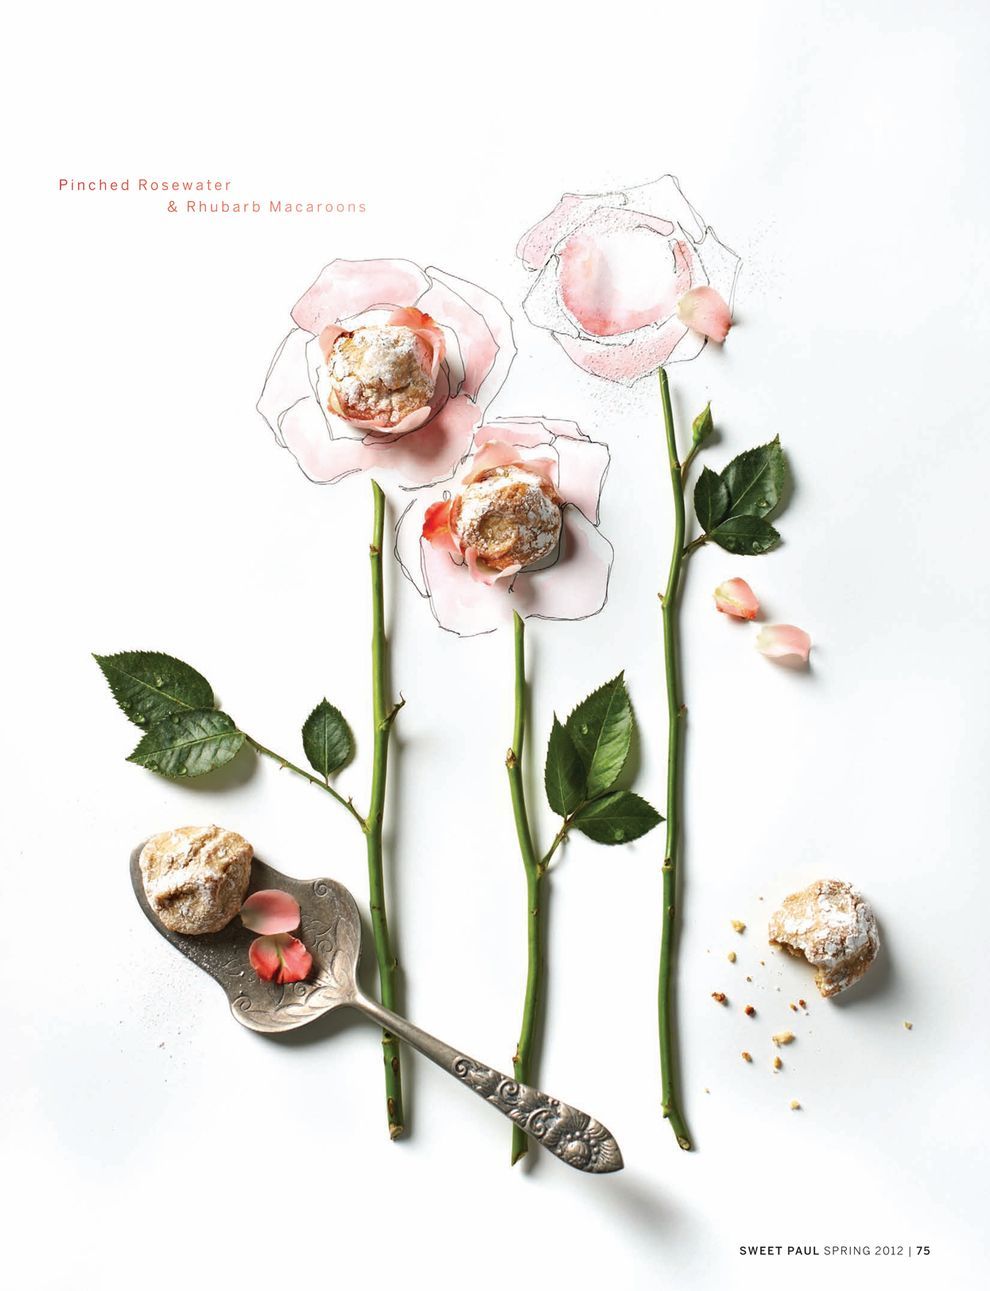 Food styling at its best!  ~ rosewater rhubarb macaroons, Sweet Paul